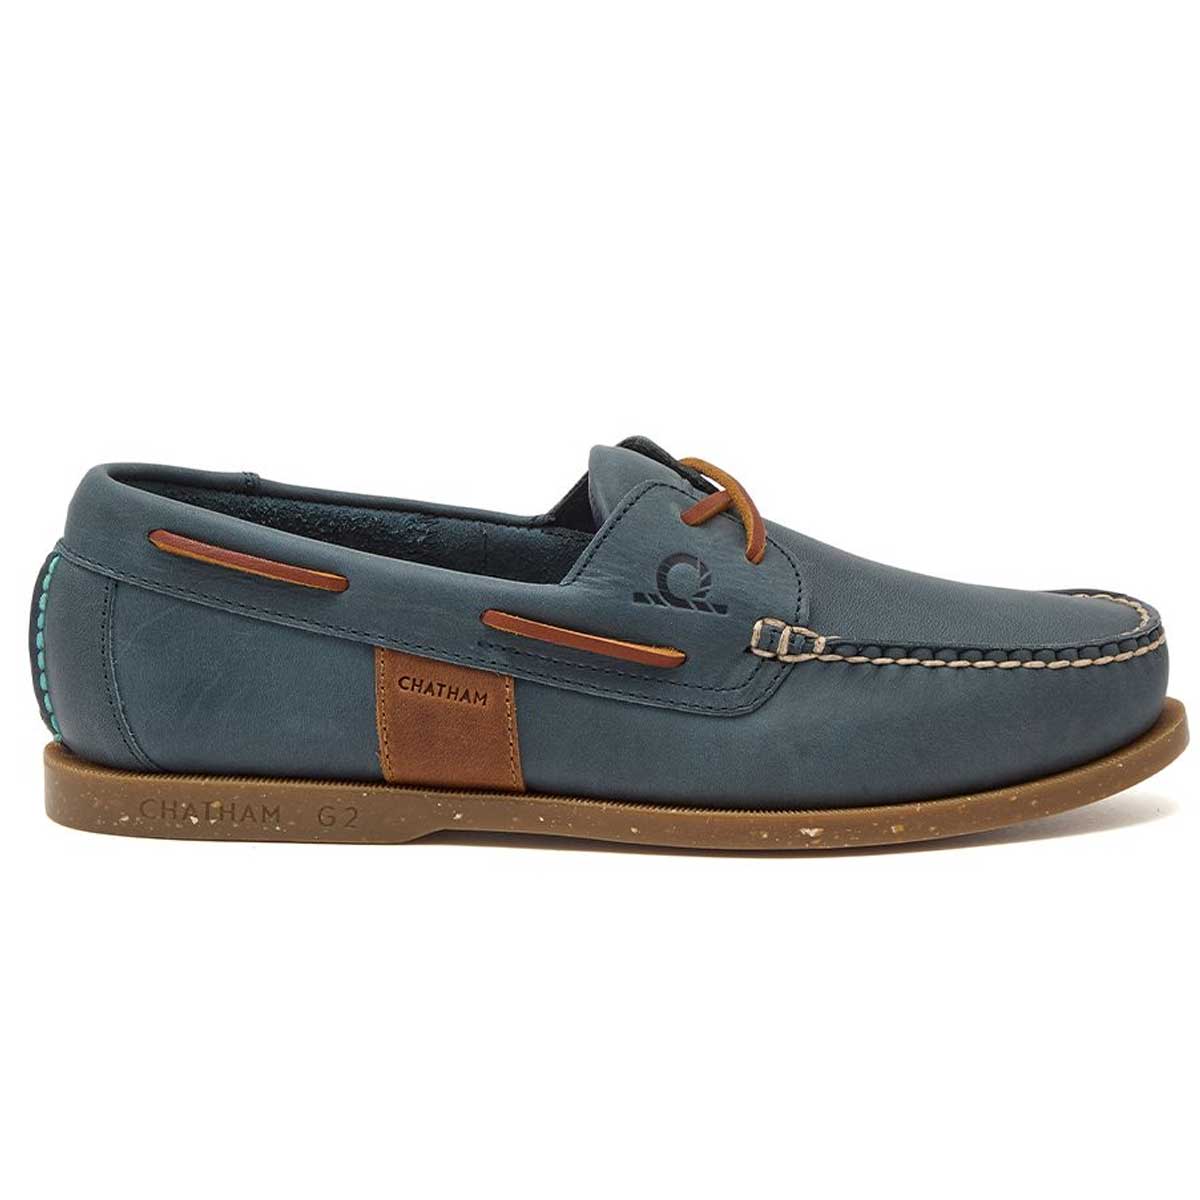 CHATHAM Java II G2 Leather Sustainable Deck Shoes - Men's - China Blue